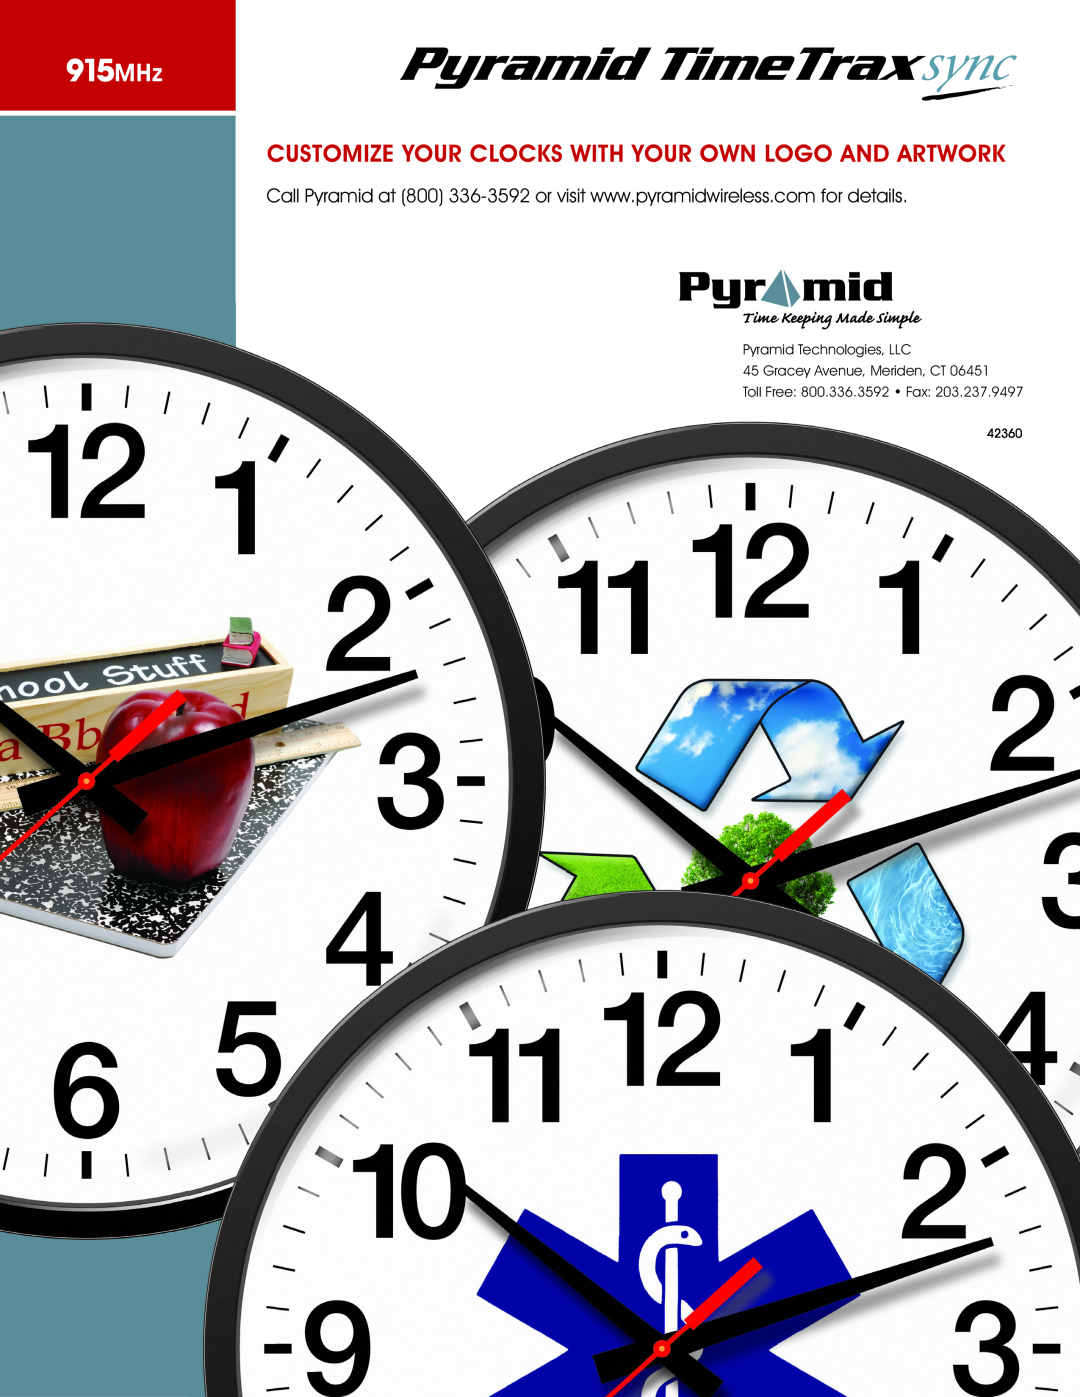 Pyramid Technologies manual 915MHz, Customize Your Clocks With Your Own Logo And Artwork, Toll Free 800.336.3592 Fax 